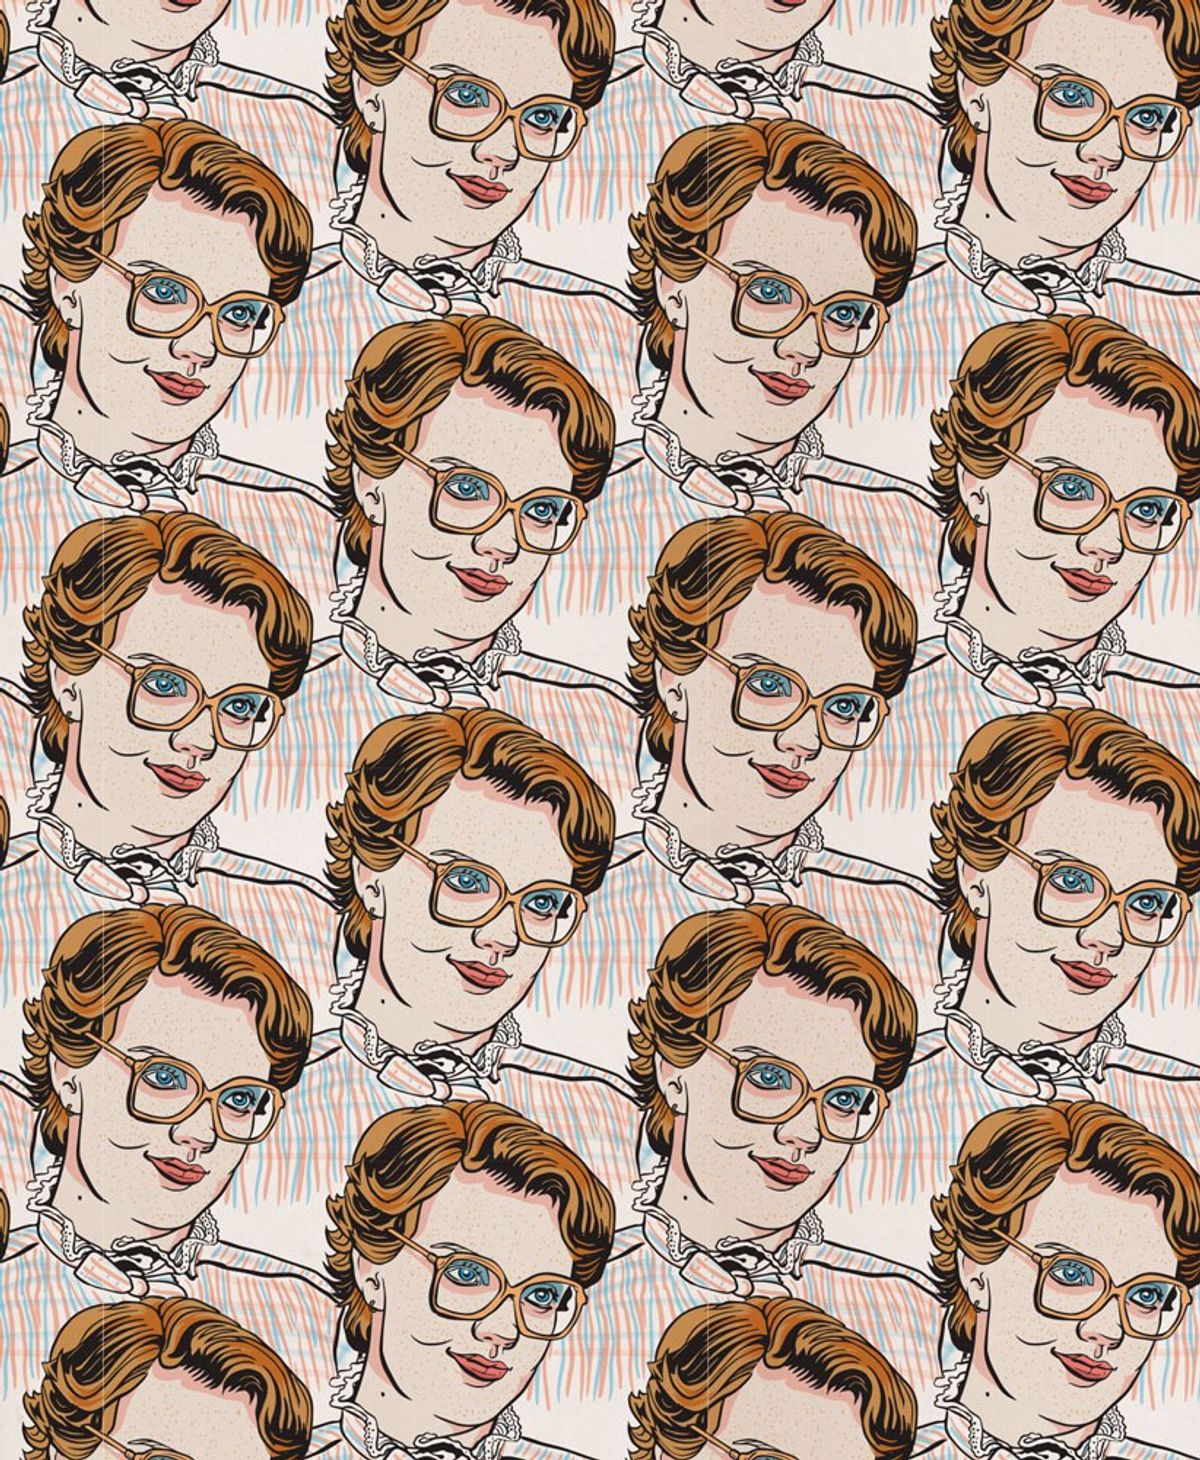 Why Barb Deserved Better